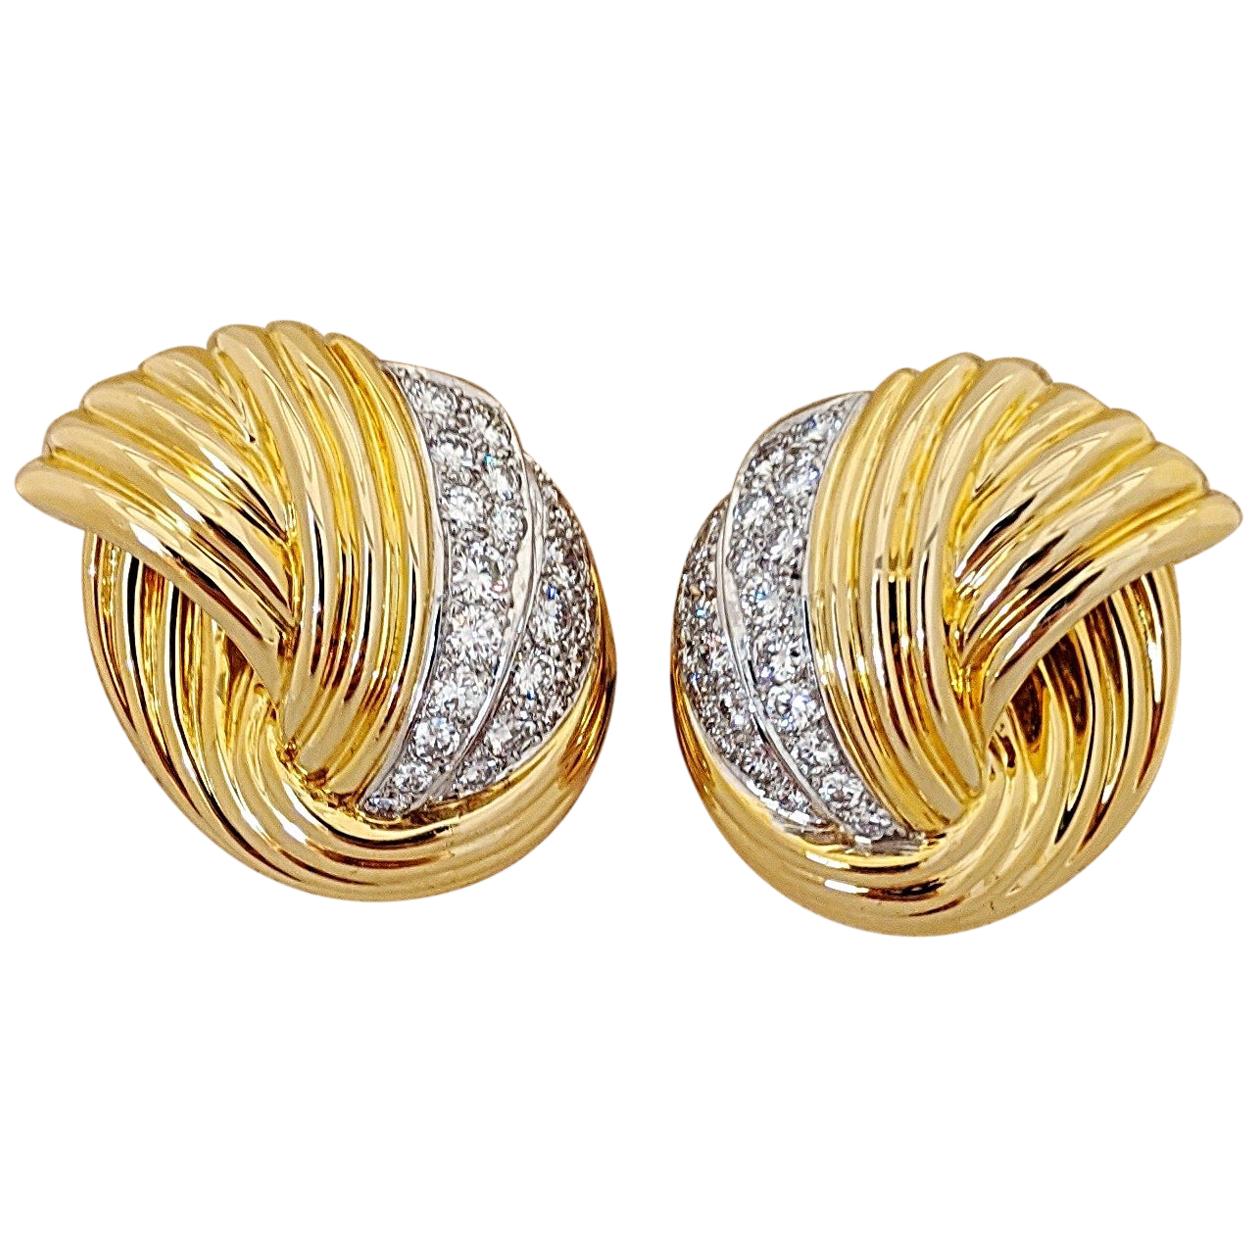 Cellini Jewelers 18 KT Y/W Gold, 2.24 CT Vintage Collectible Dia.Swirl Earrings